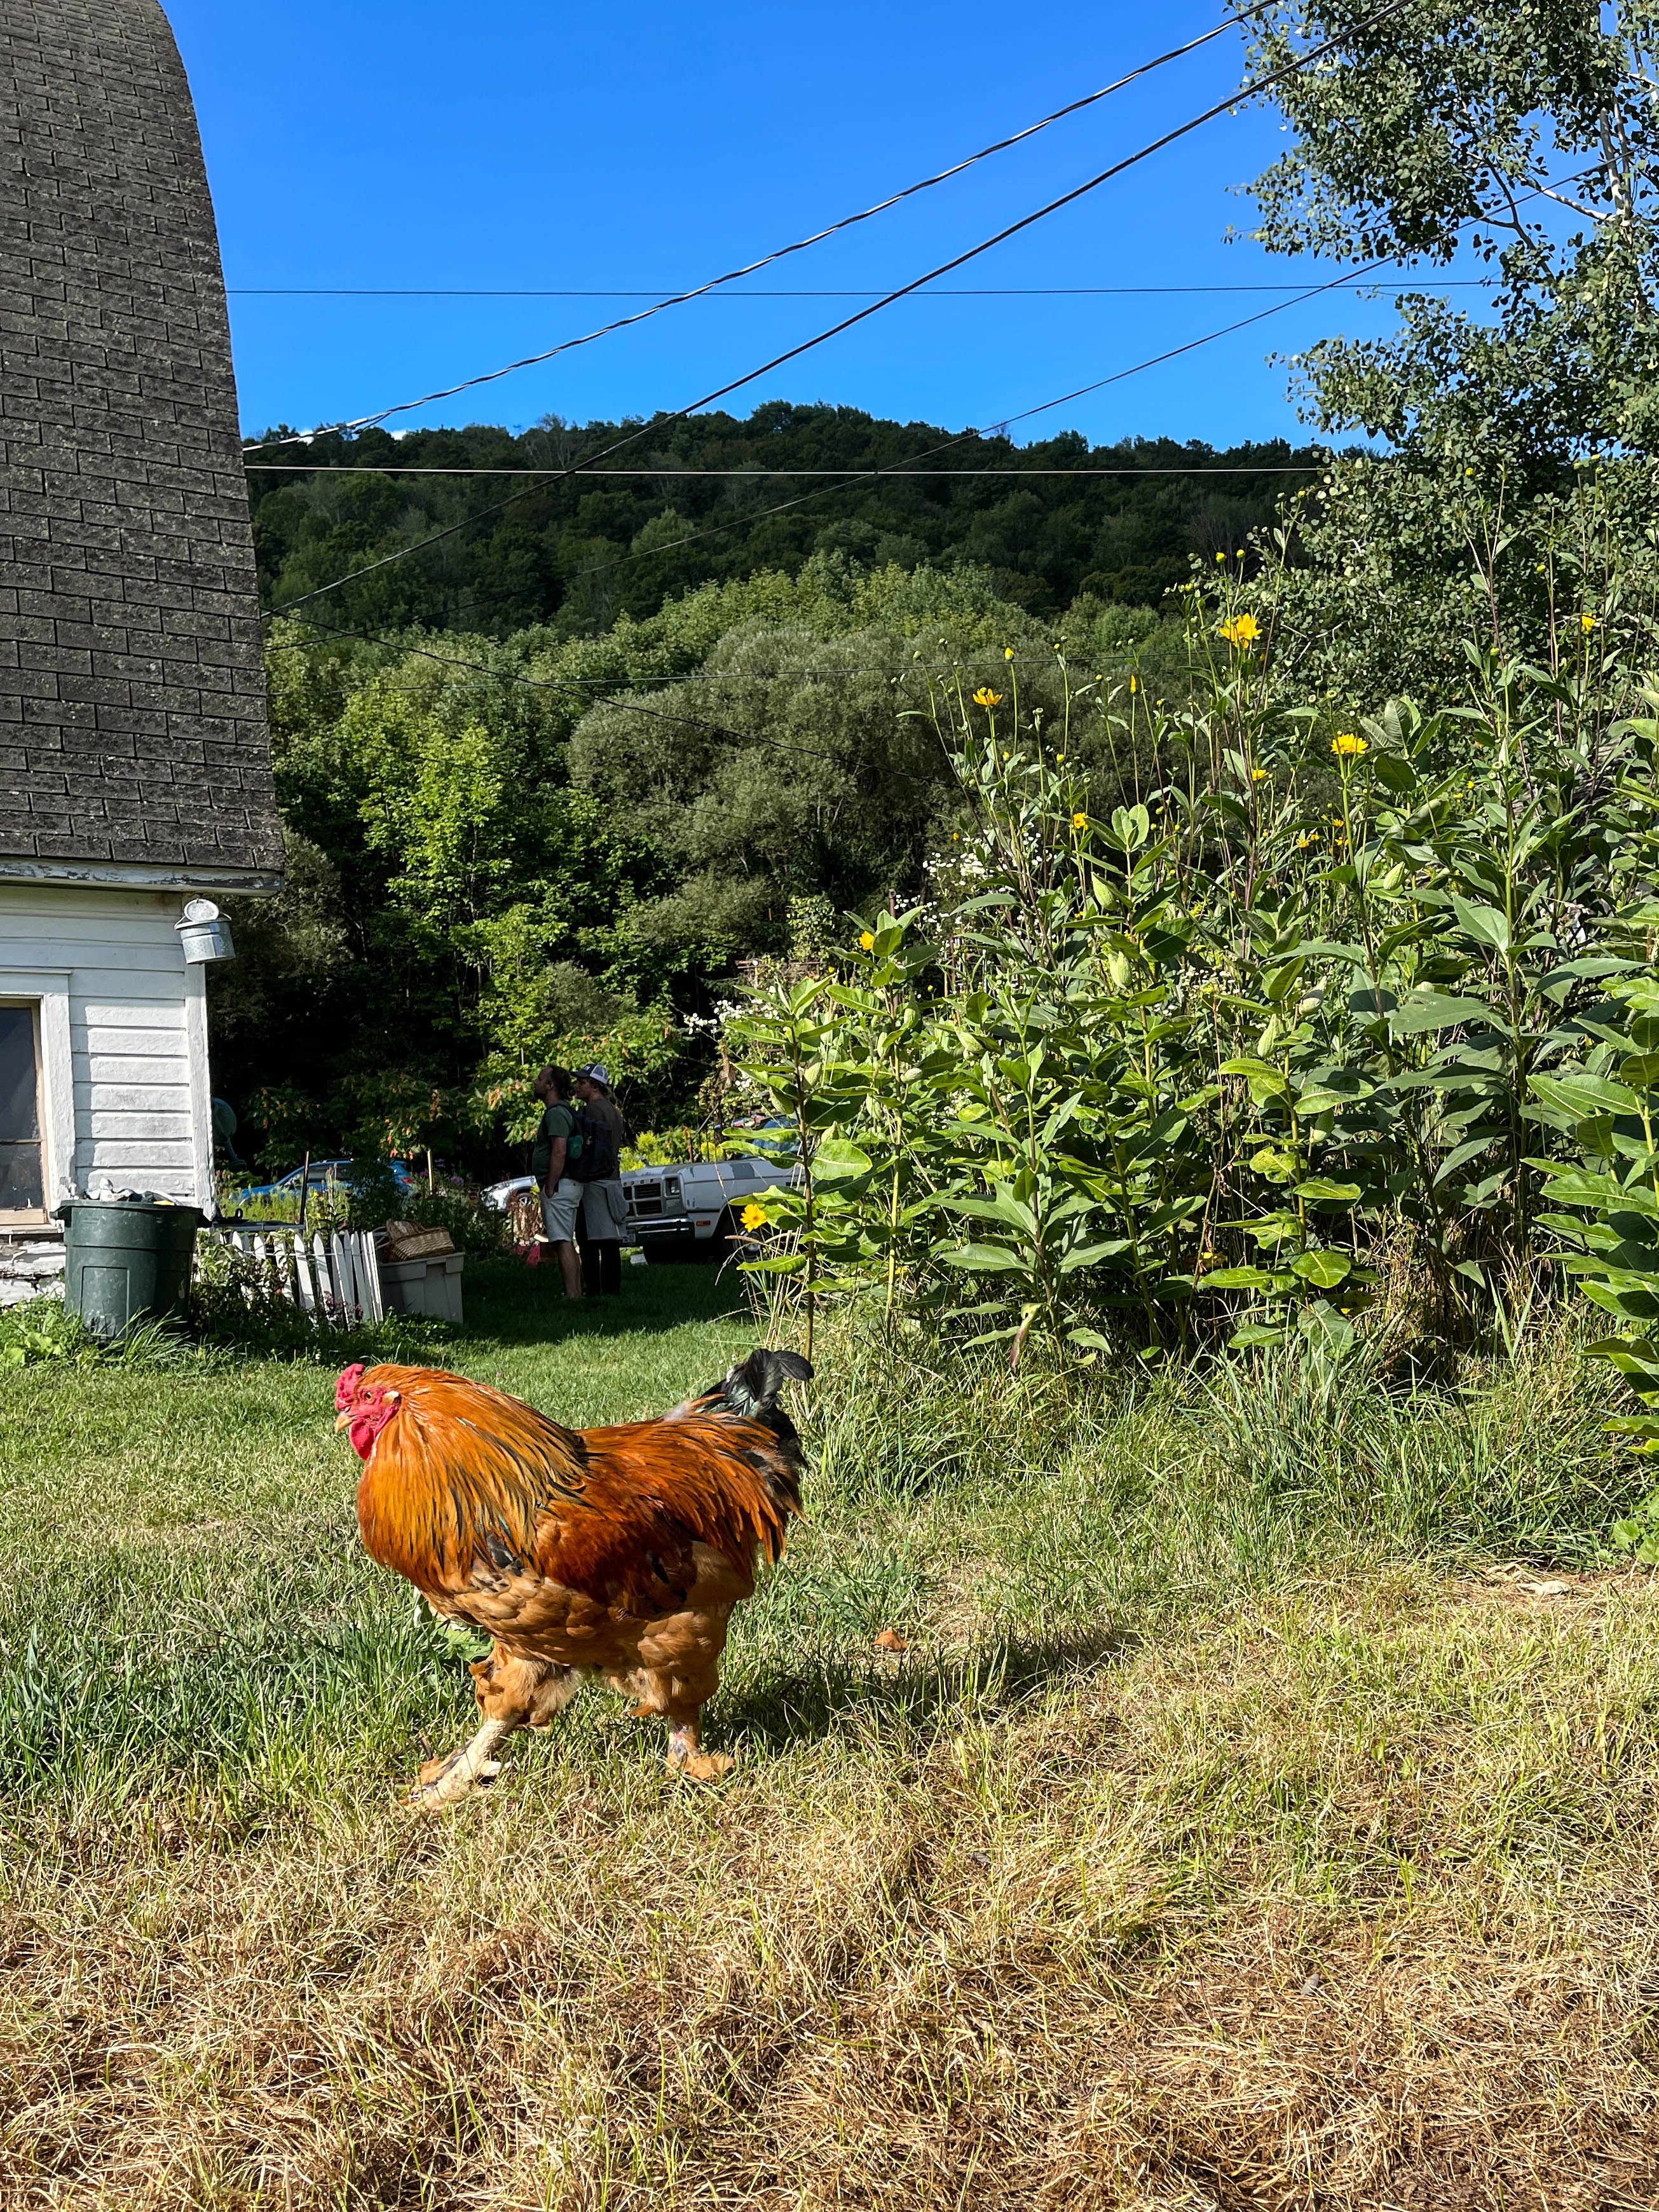 A rooster strutting in grass at 9am at Heritage Radio Network's Catskills Field Day